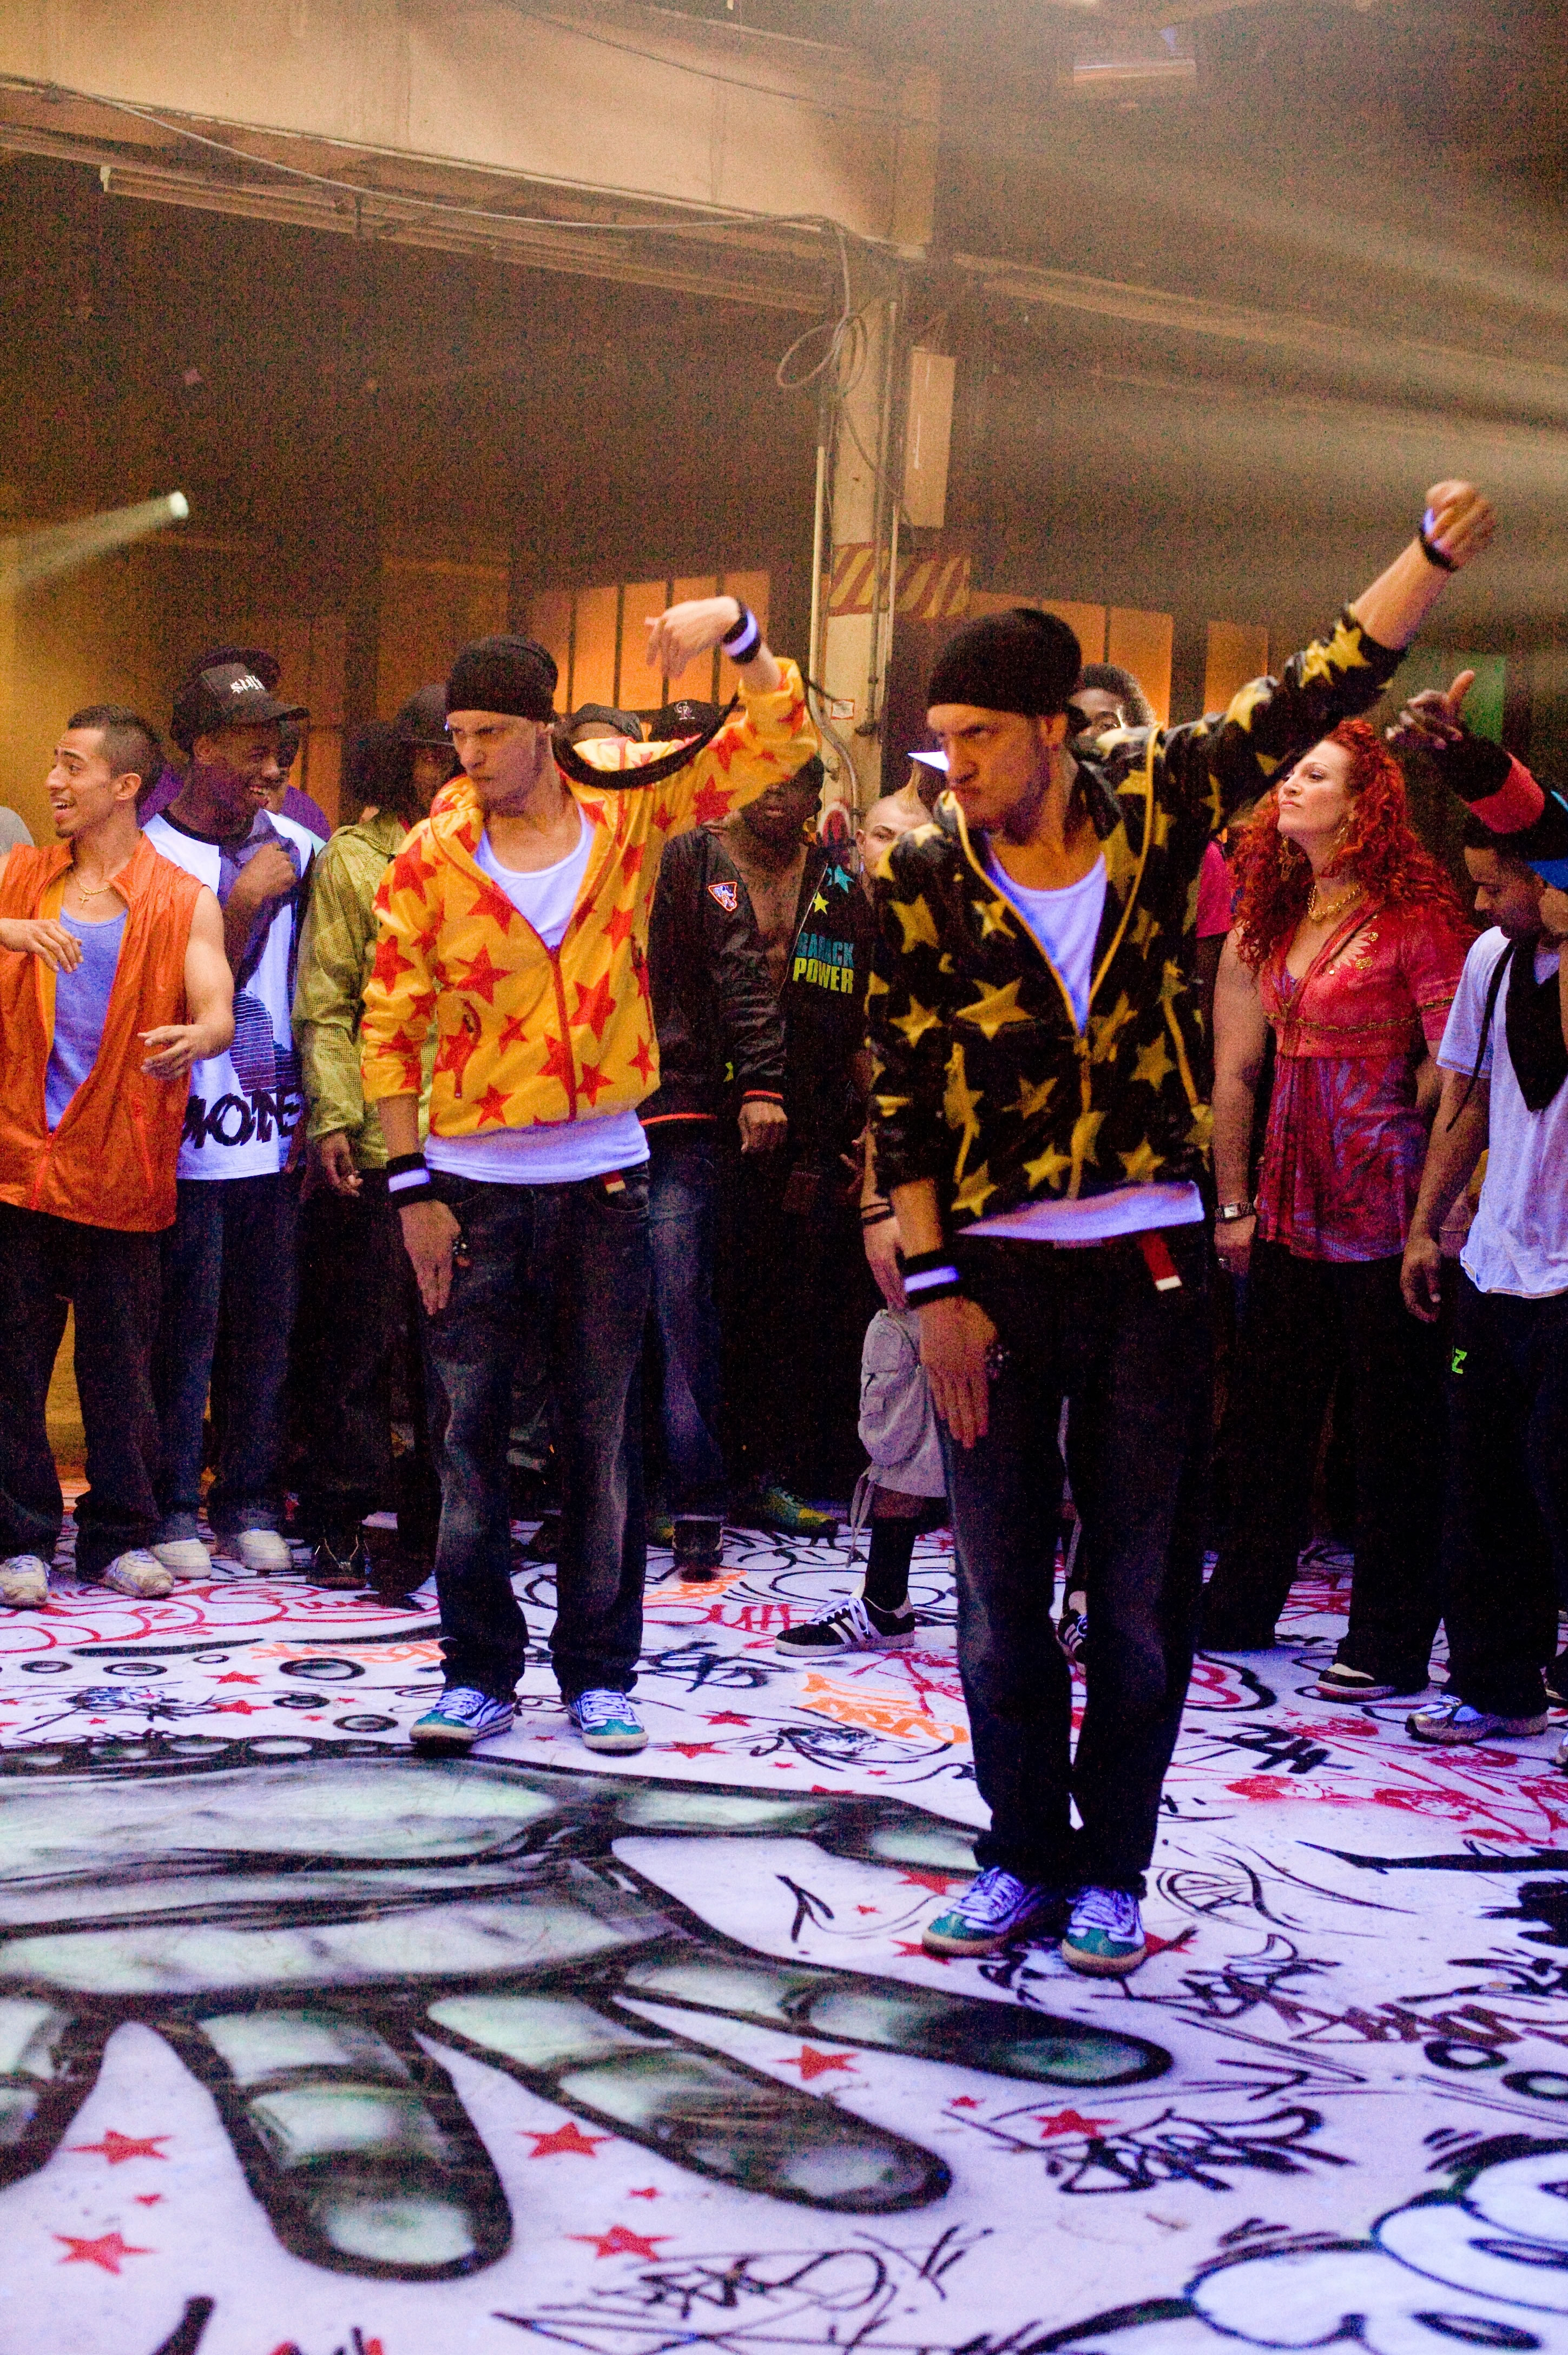 Still of Facundo Lombard and Martín Lombard in Step Up 3D (2010)